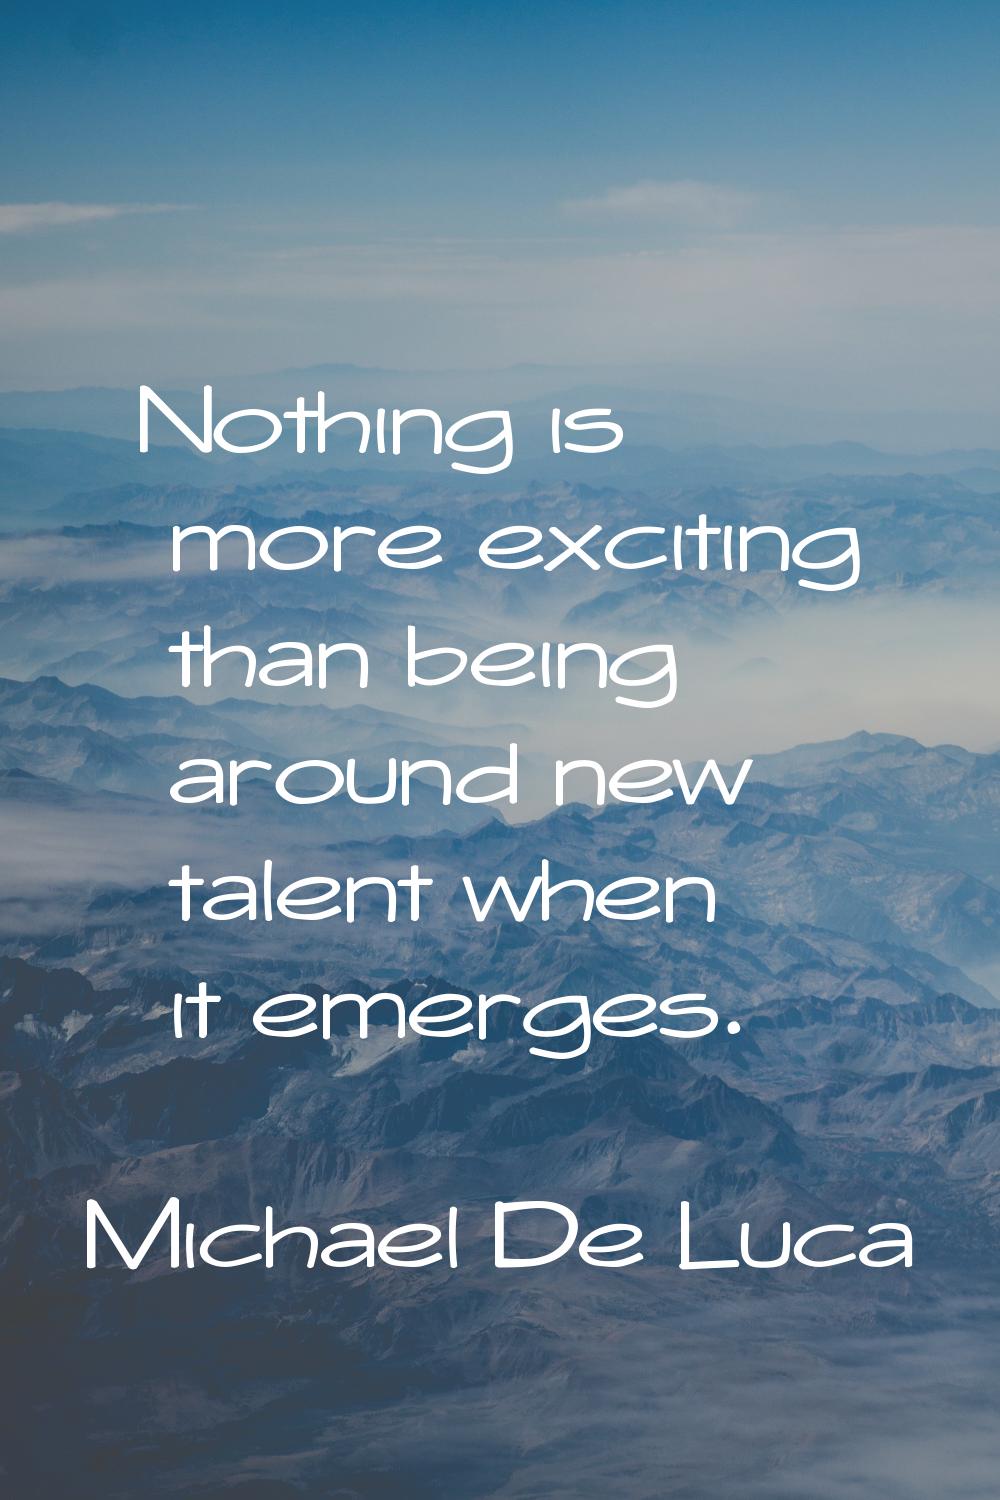 Nothing is more exciting than being around new talent when it emerges.